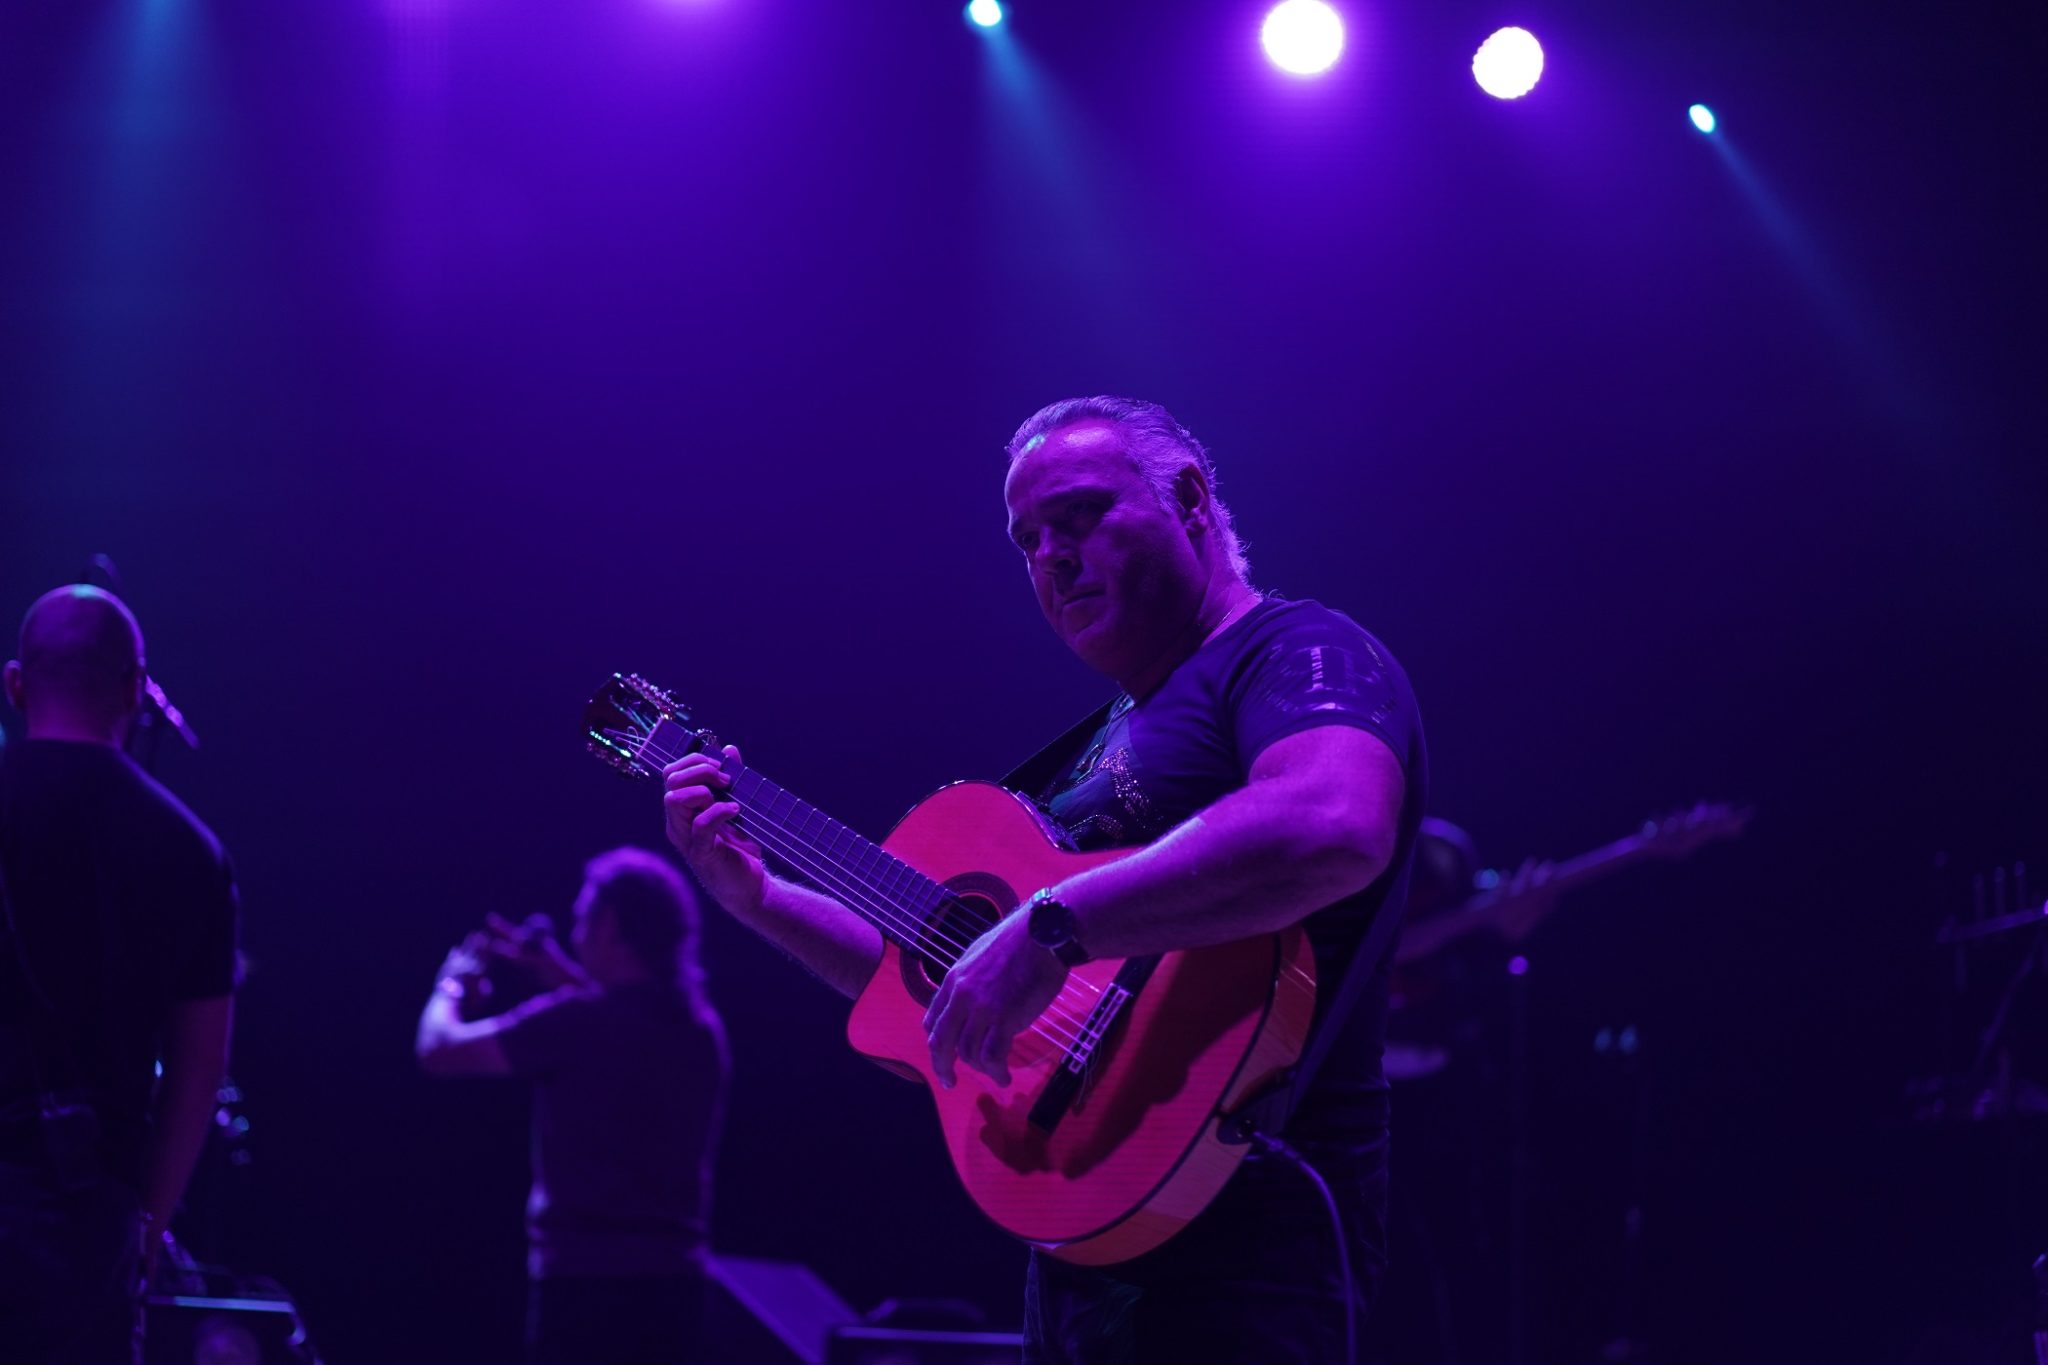 NCPA@home presents Grammy Award Winner André Reyes with the Gipsy Kings decoding=